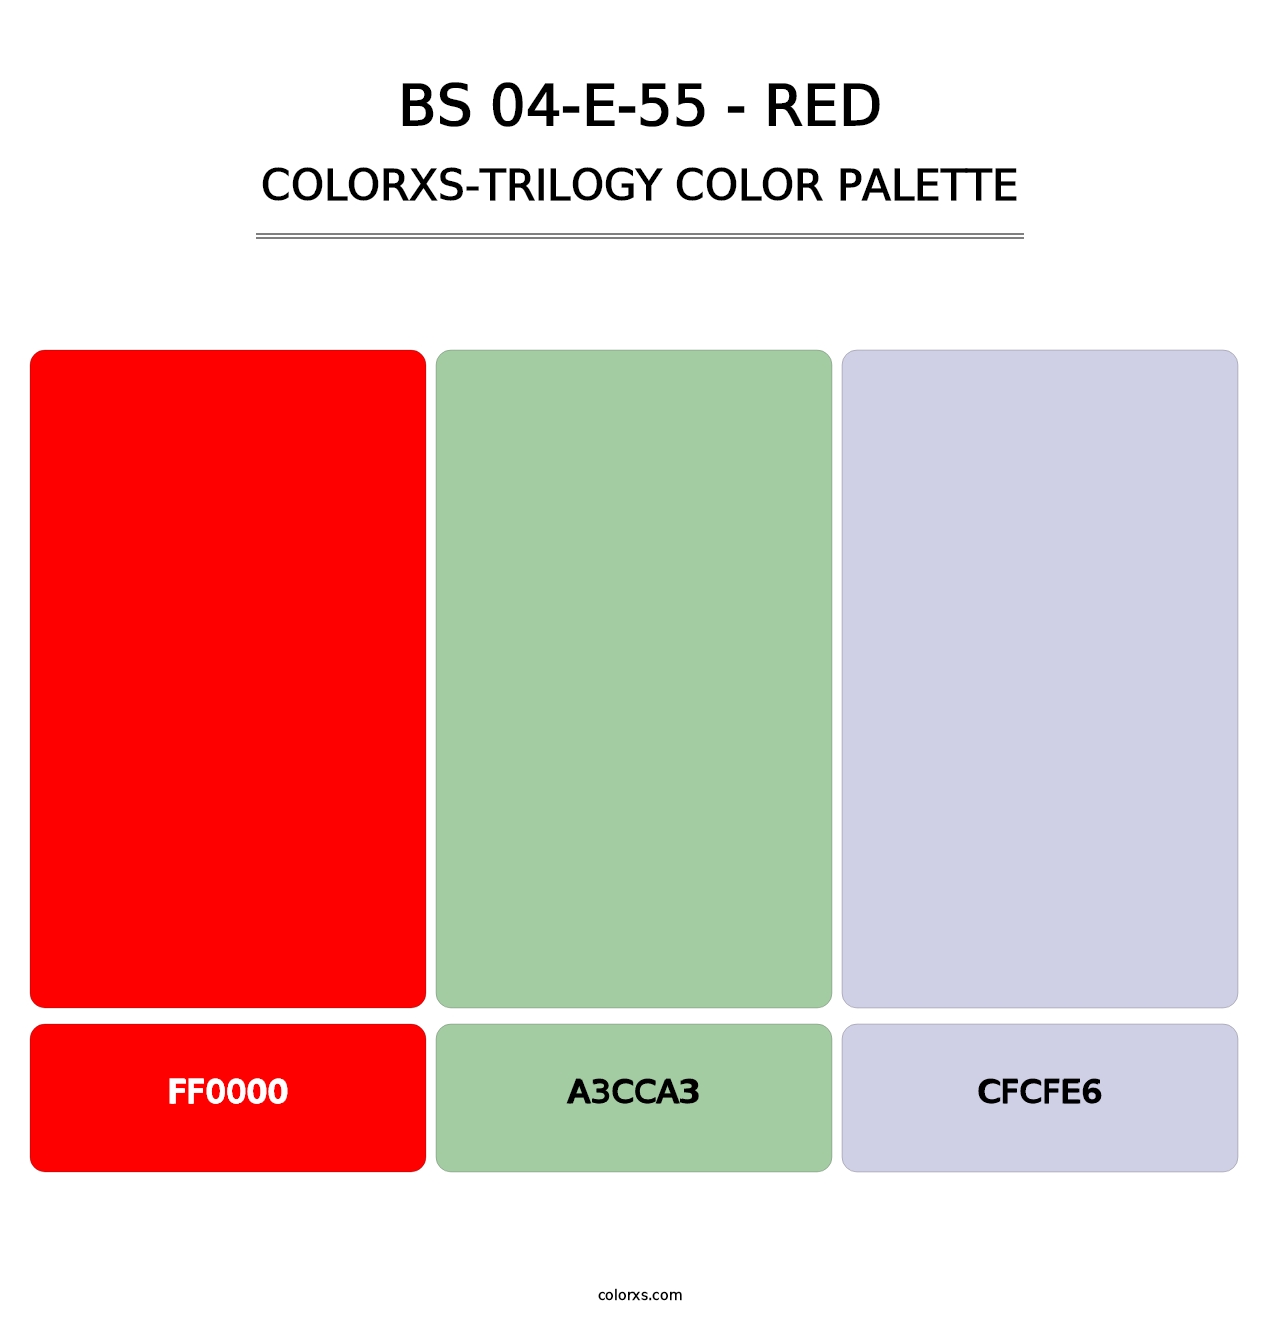 BS 04-E-55 - Red - Colorxs Trilogy Palette